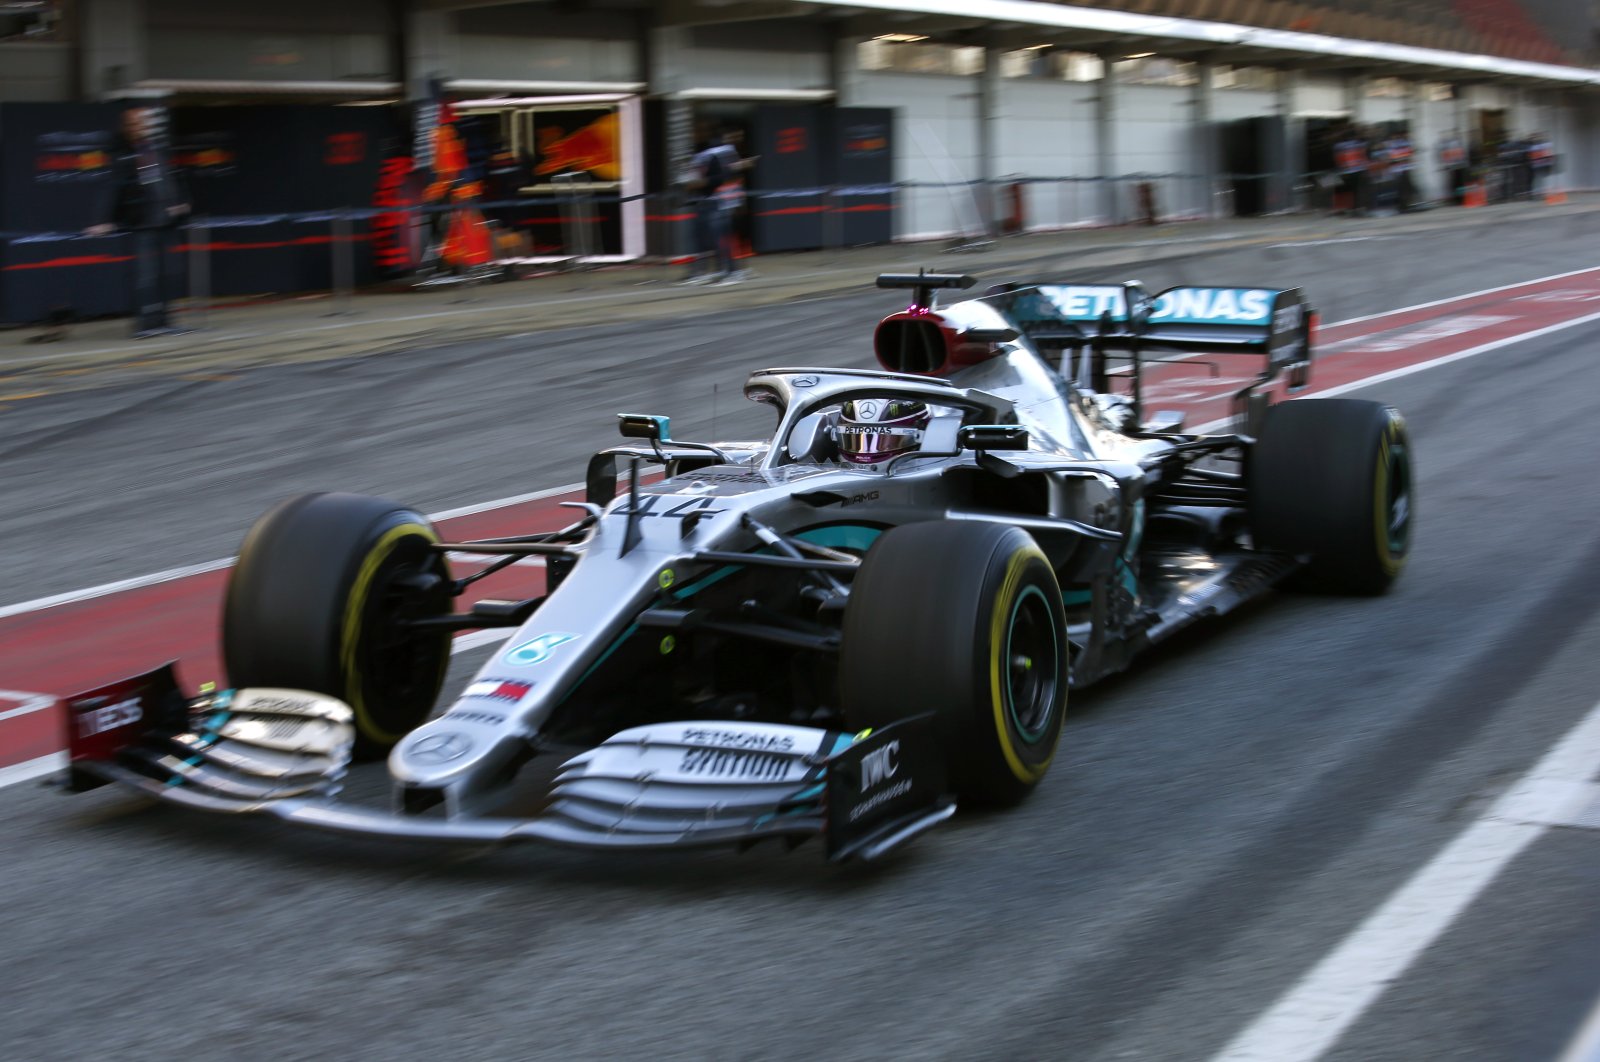 Mercedes driver Lewis Hamilton pulls out of the pit lane during the Formula One pre-season testing session at the Barcelona Catalunya racetrack in Montmelo, Barcelona, Spain, Feb. 28, 2020. (AP Photo)